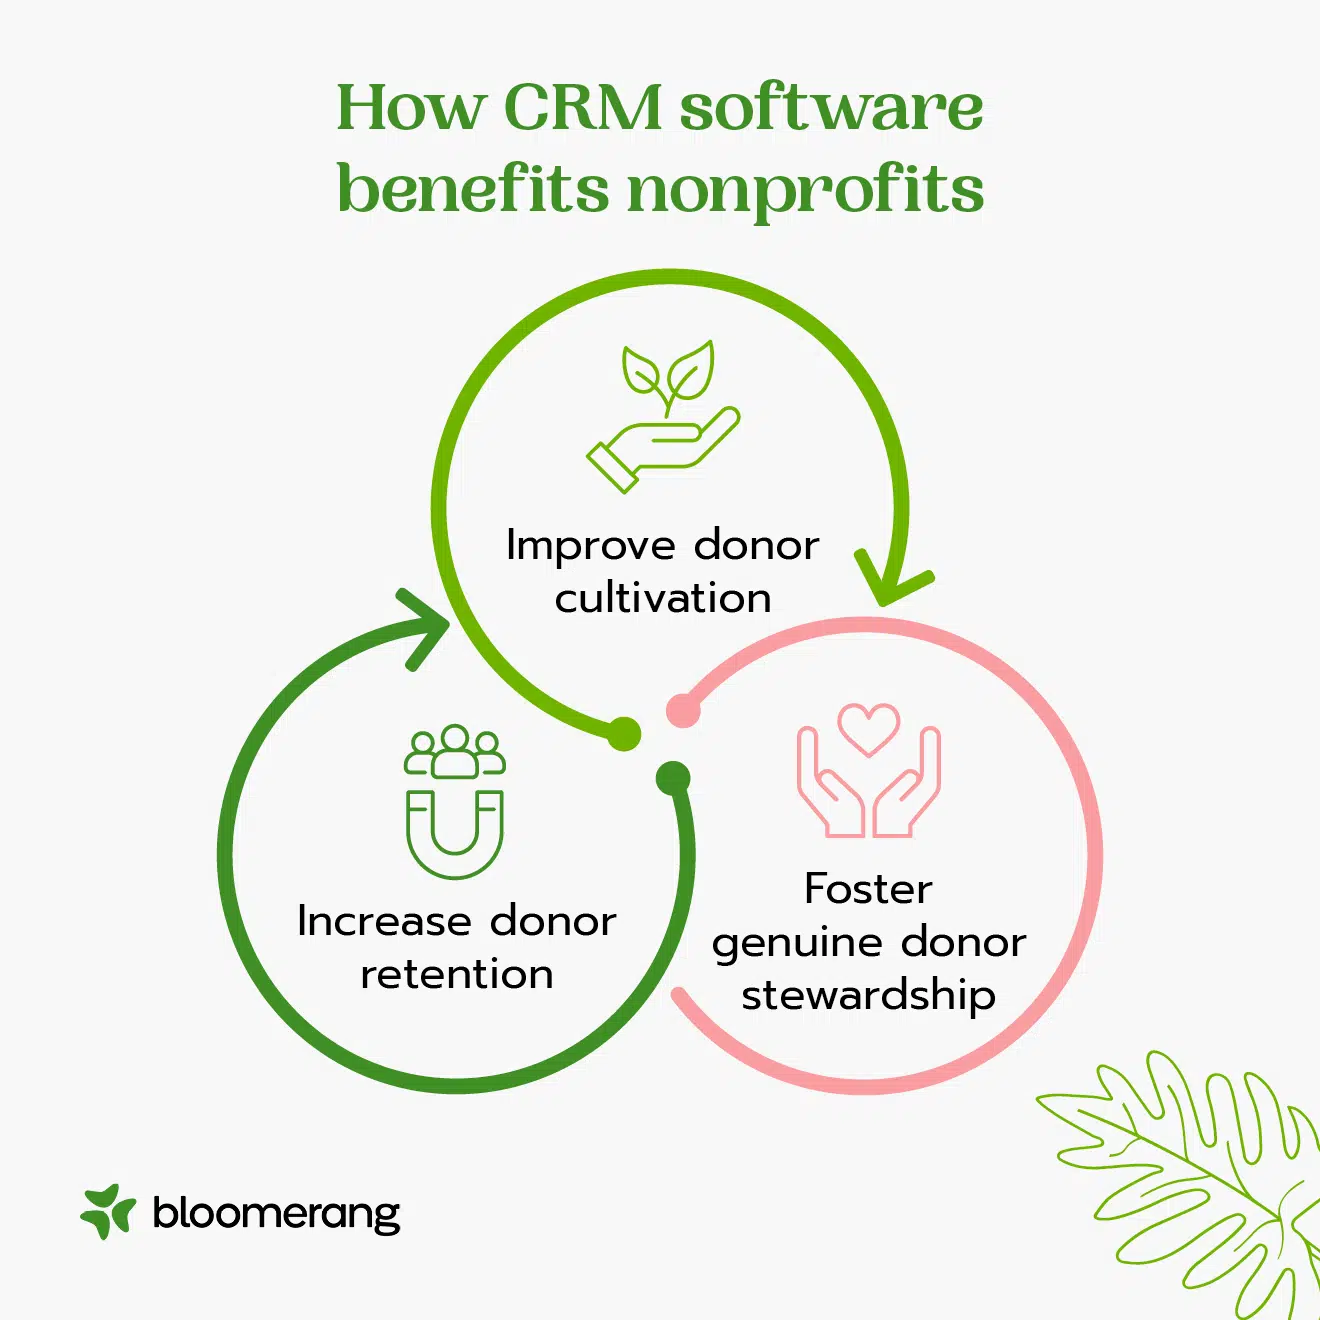 Three core donor stewardship-related benefits of nonprofit CRMs